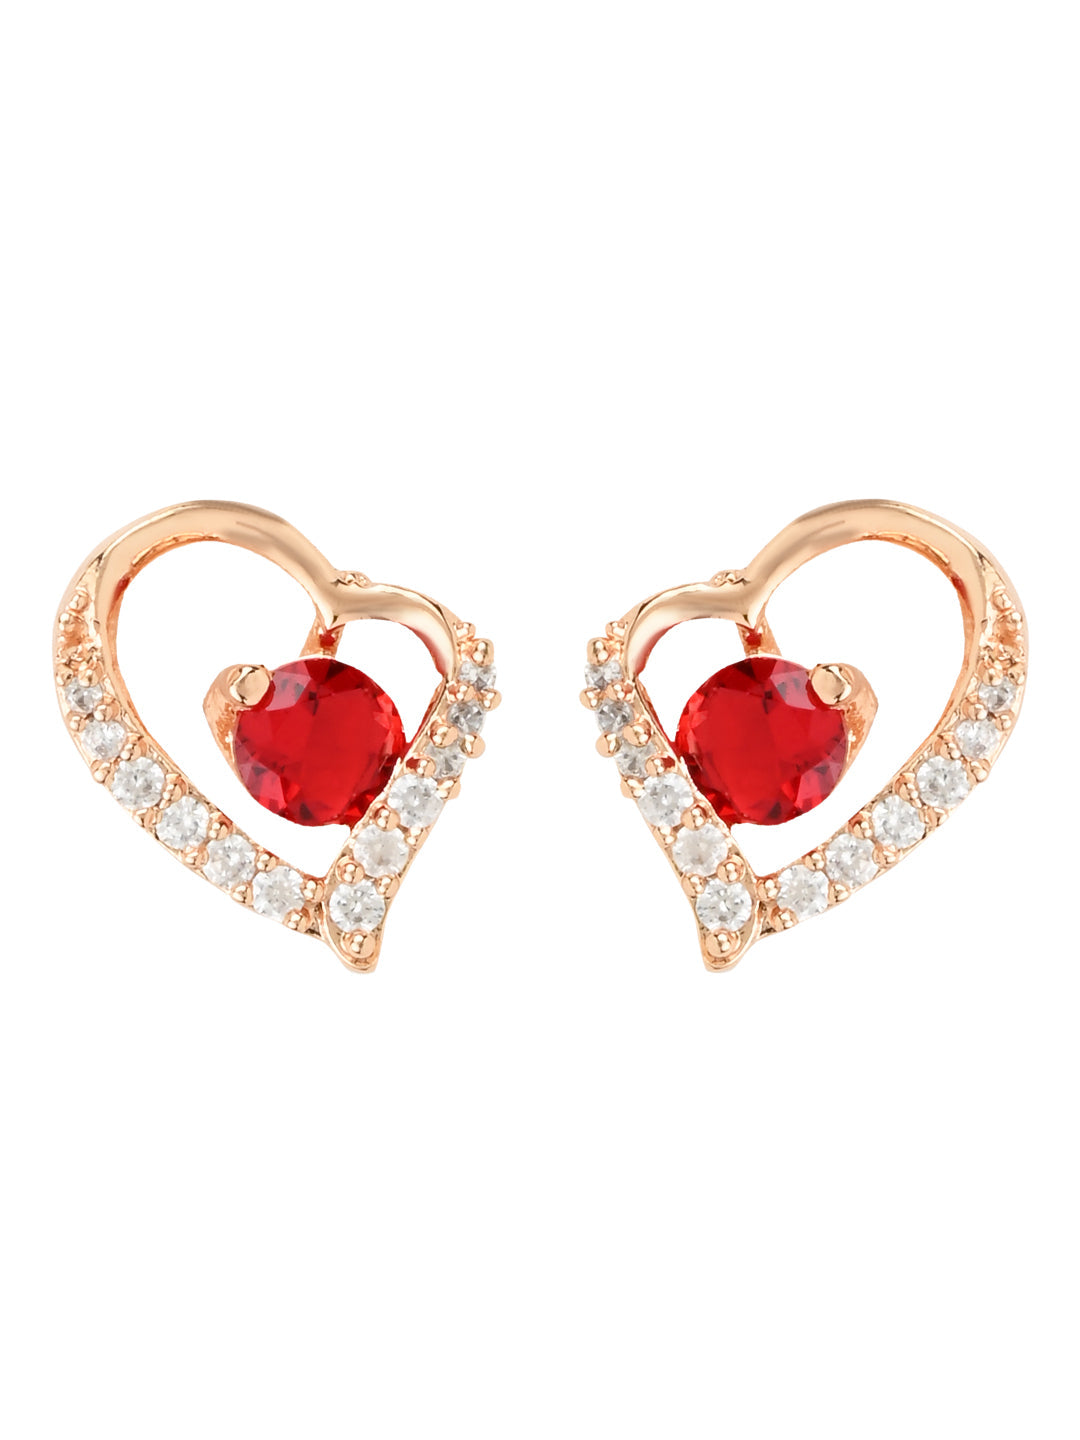 Women's I Jewels Valentine'S Special Rose Gold-Plated Heart Shaped Studs (E2972R) - I Jewels